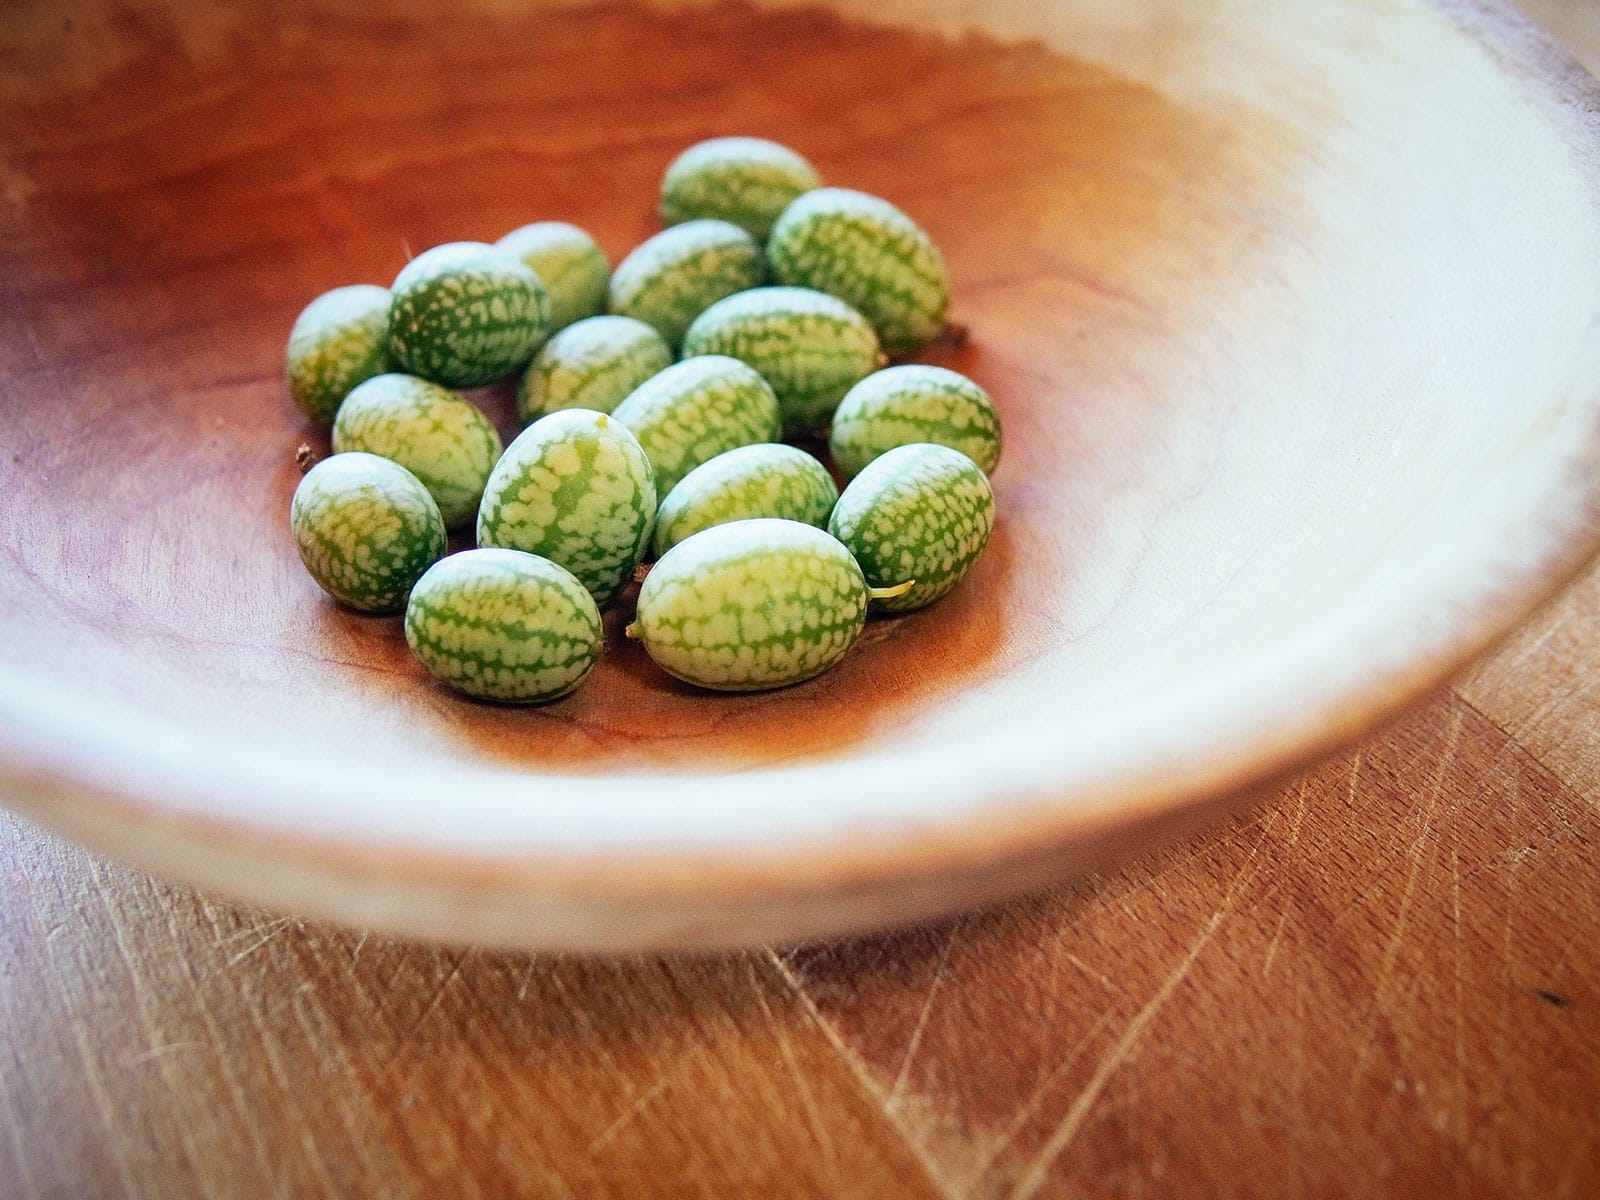 A handful of cucamelons (Mexican sour gherkins) in a shallow wooden bowl on a wooden surface